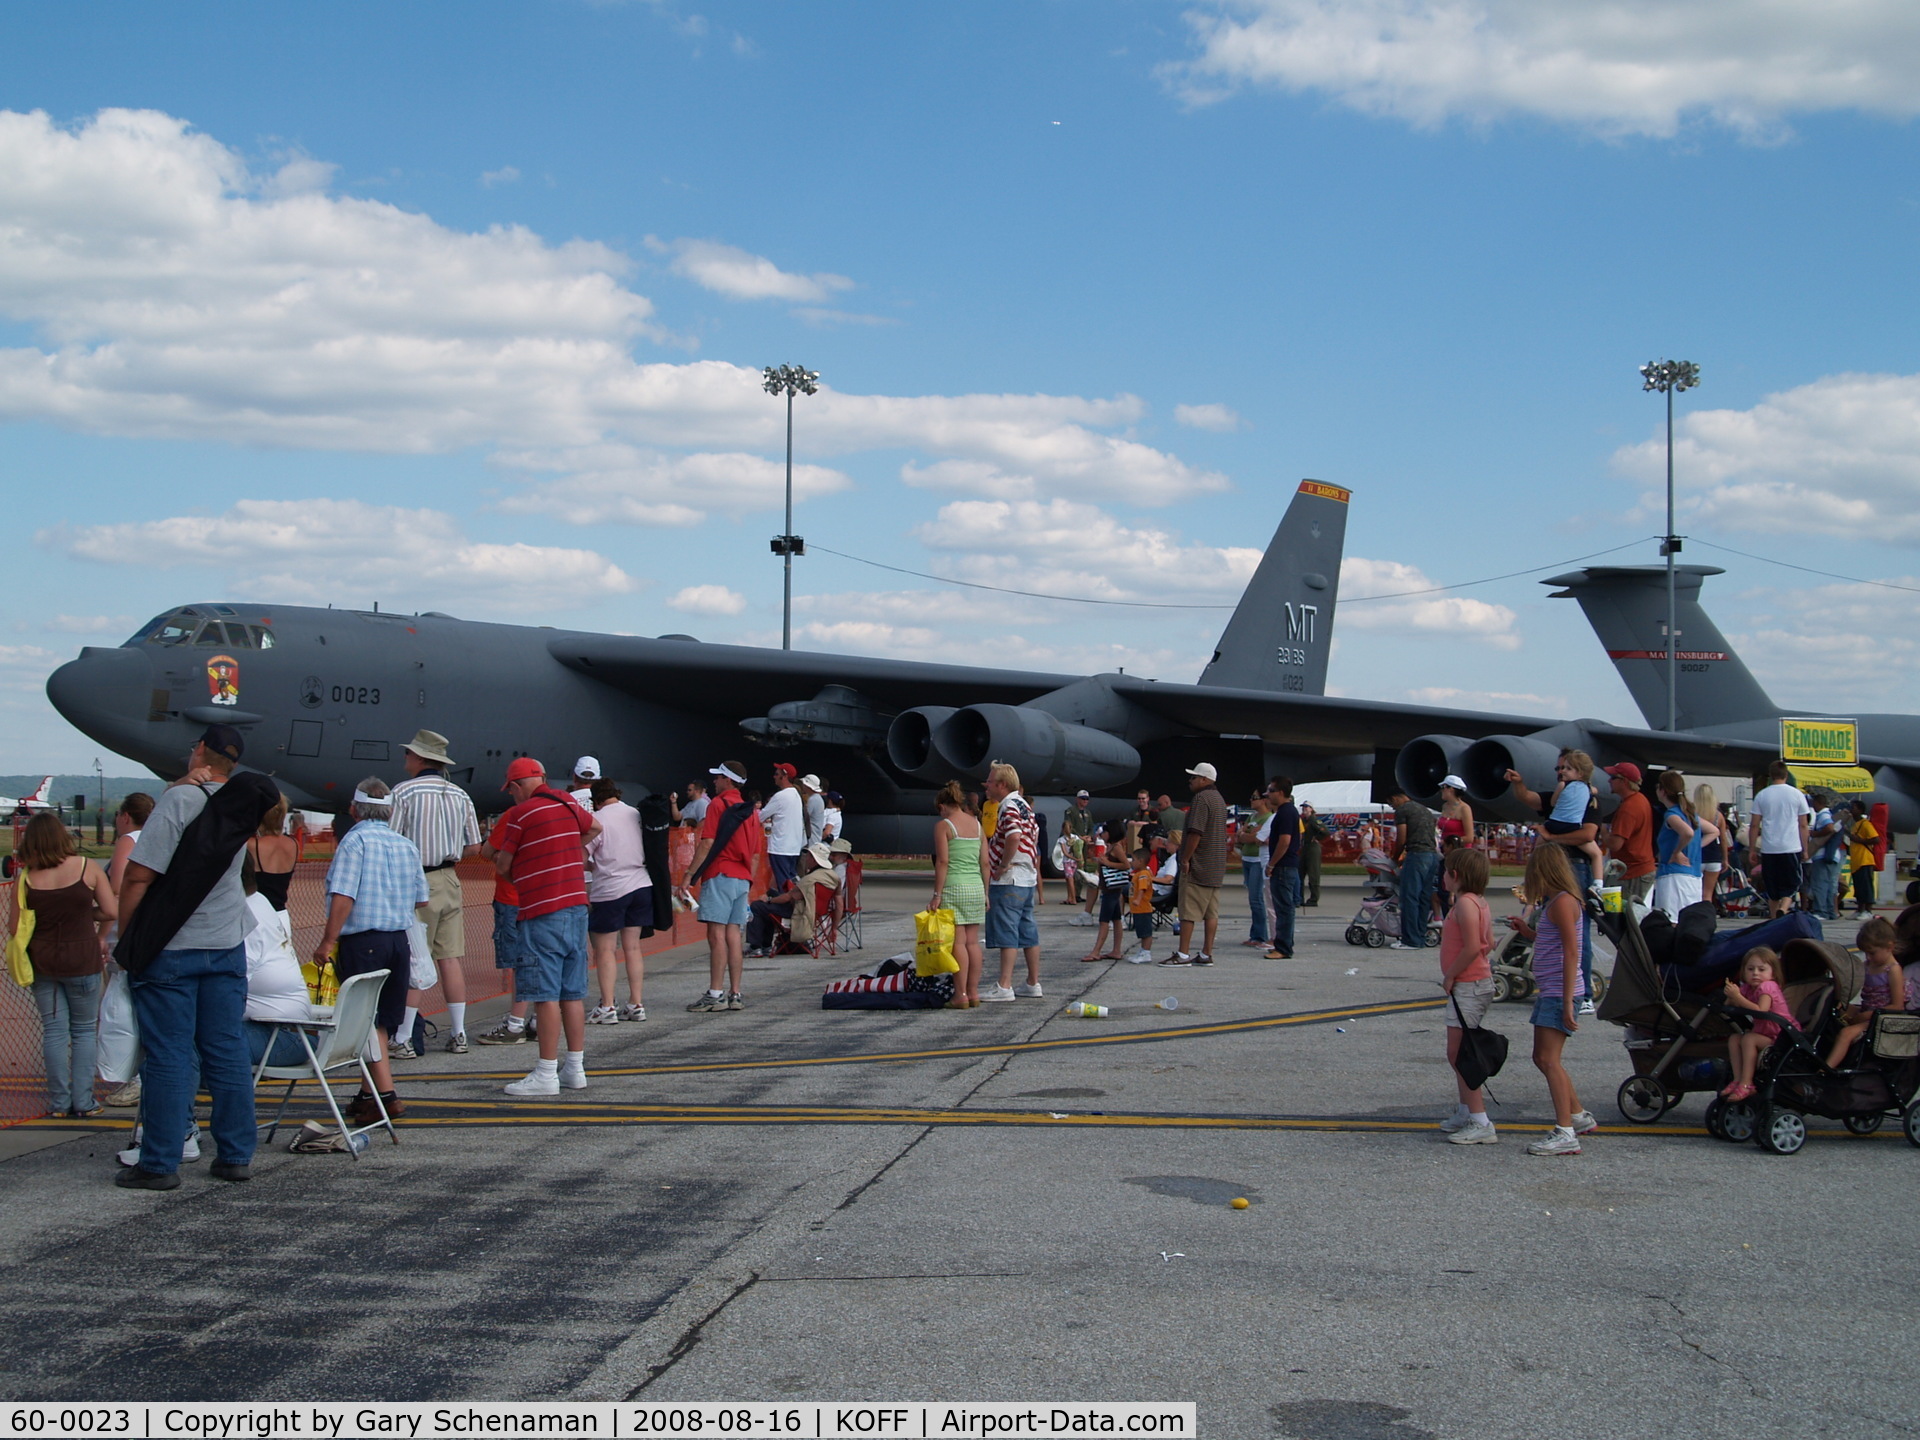 60-0023, 1960 Boeing B-52H Stratofortress C/N 464388, B-52 AT OFFUTT AIRSHOW 2008